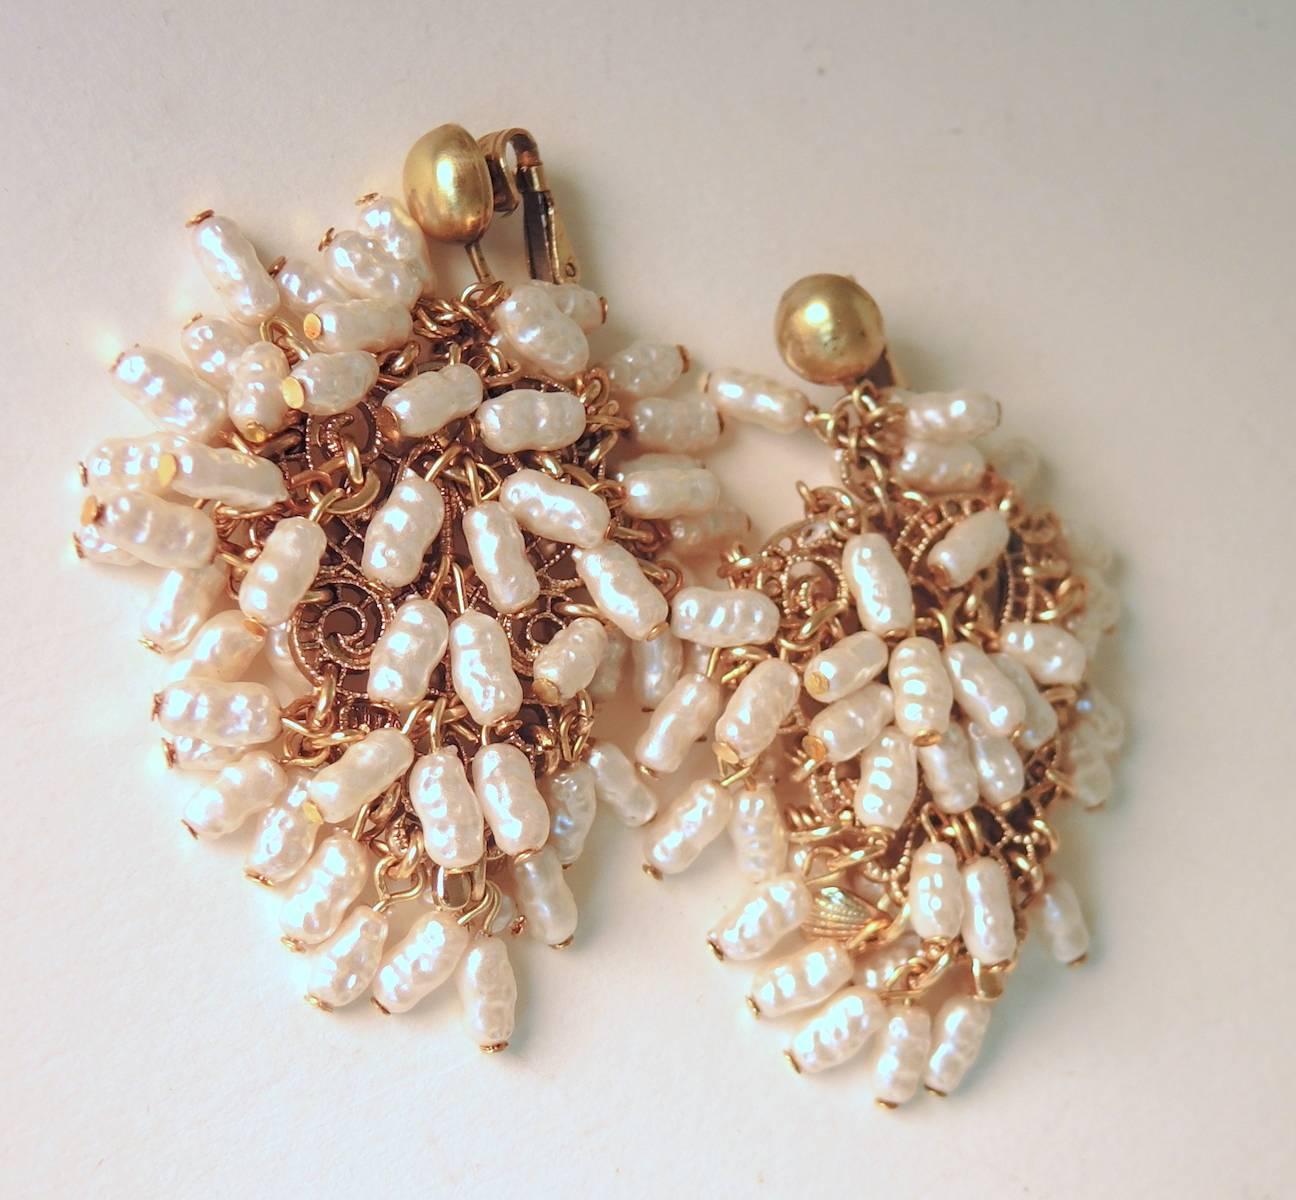 These beautiful statement earrings by Vogue are made with a massive amount of tiny faux pearls in a gold-tone setting.  These clip earrings measure 2-1/2” x 2” and are signed “Vogue”.  They are in excellent condition.